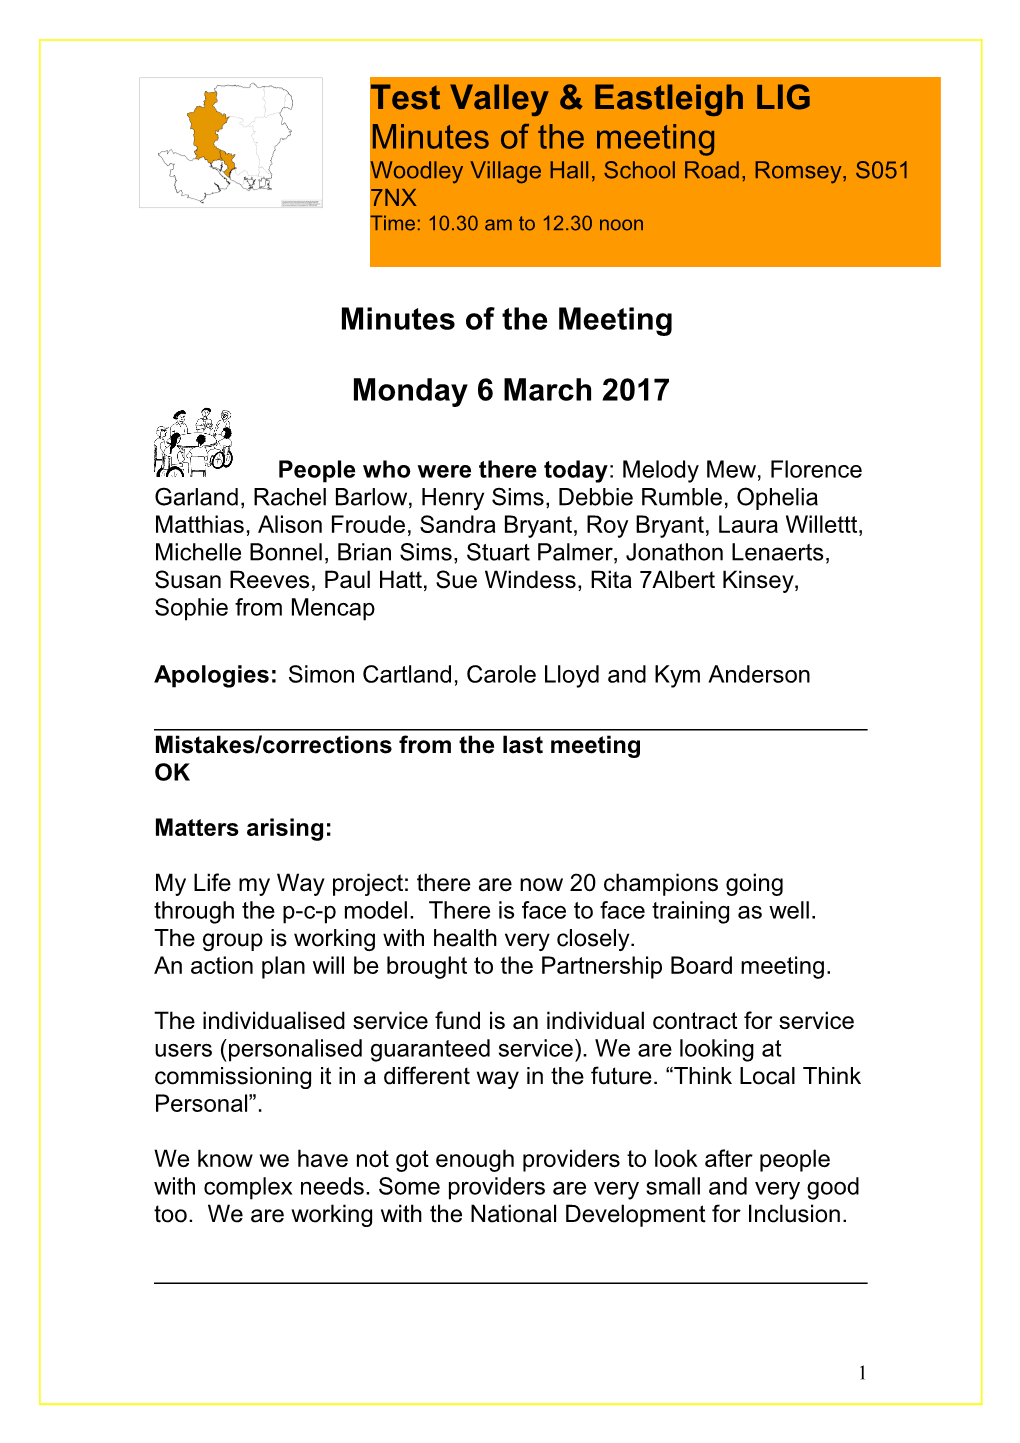 Minutes of the Meeting s12